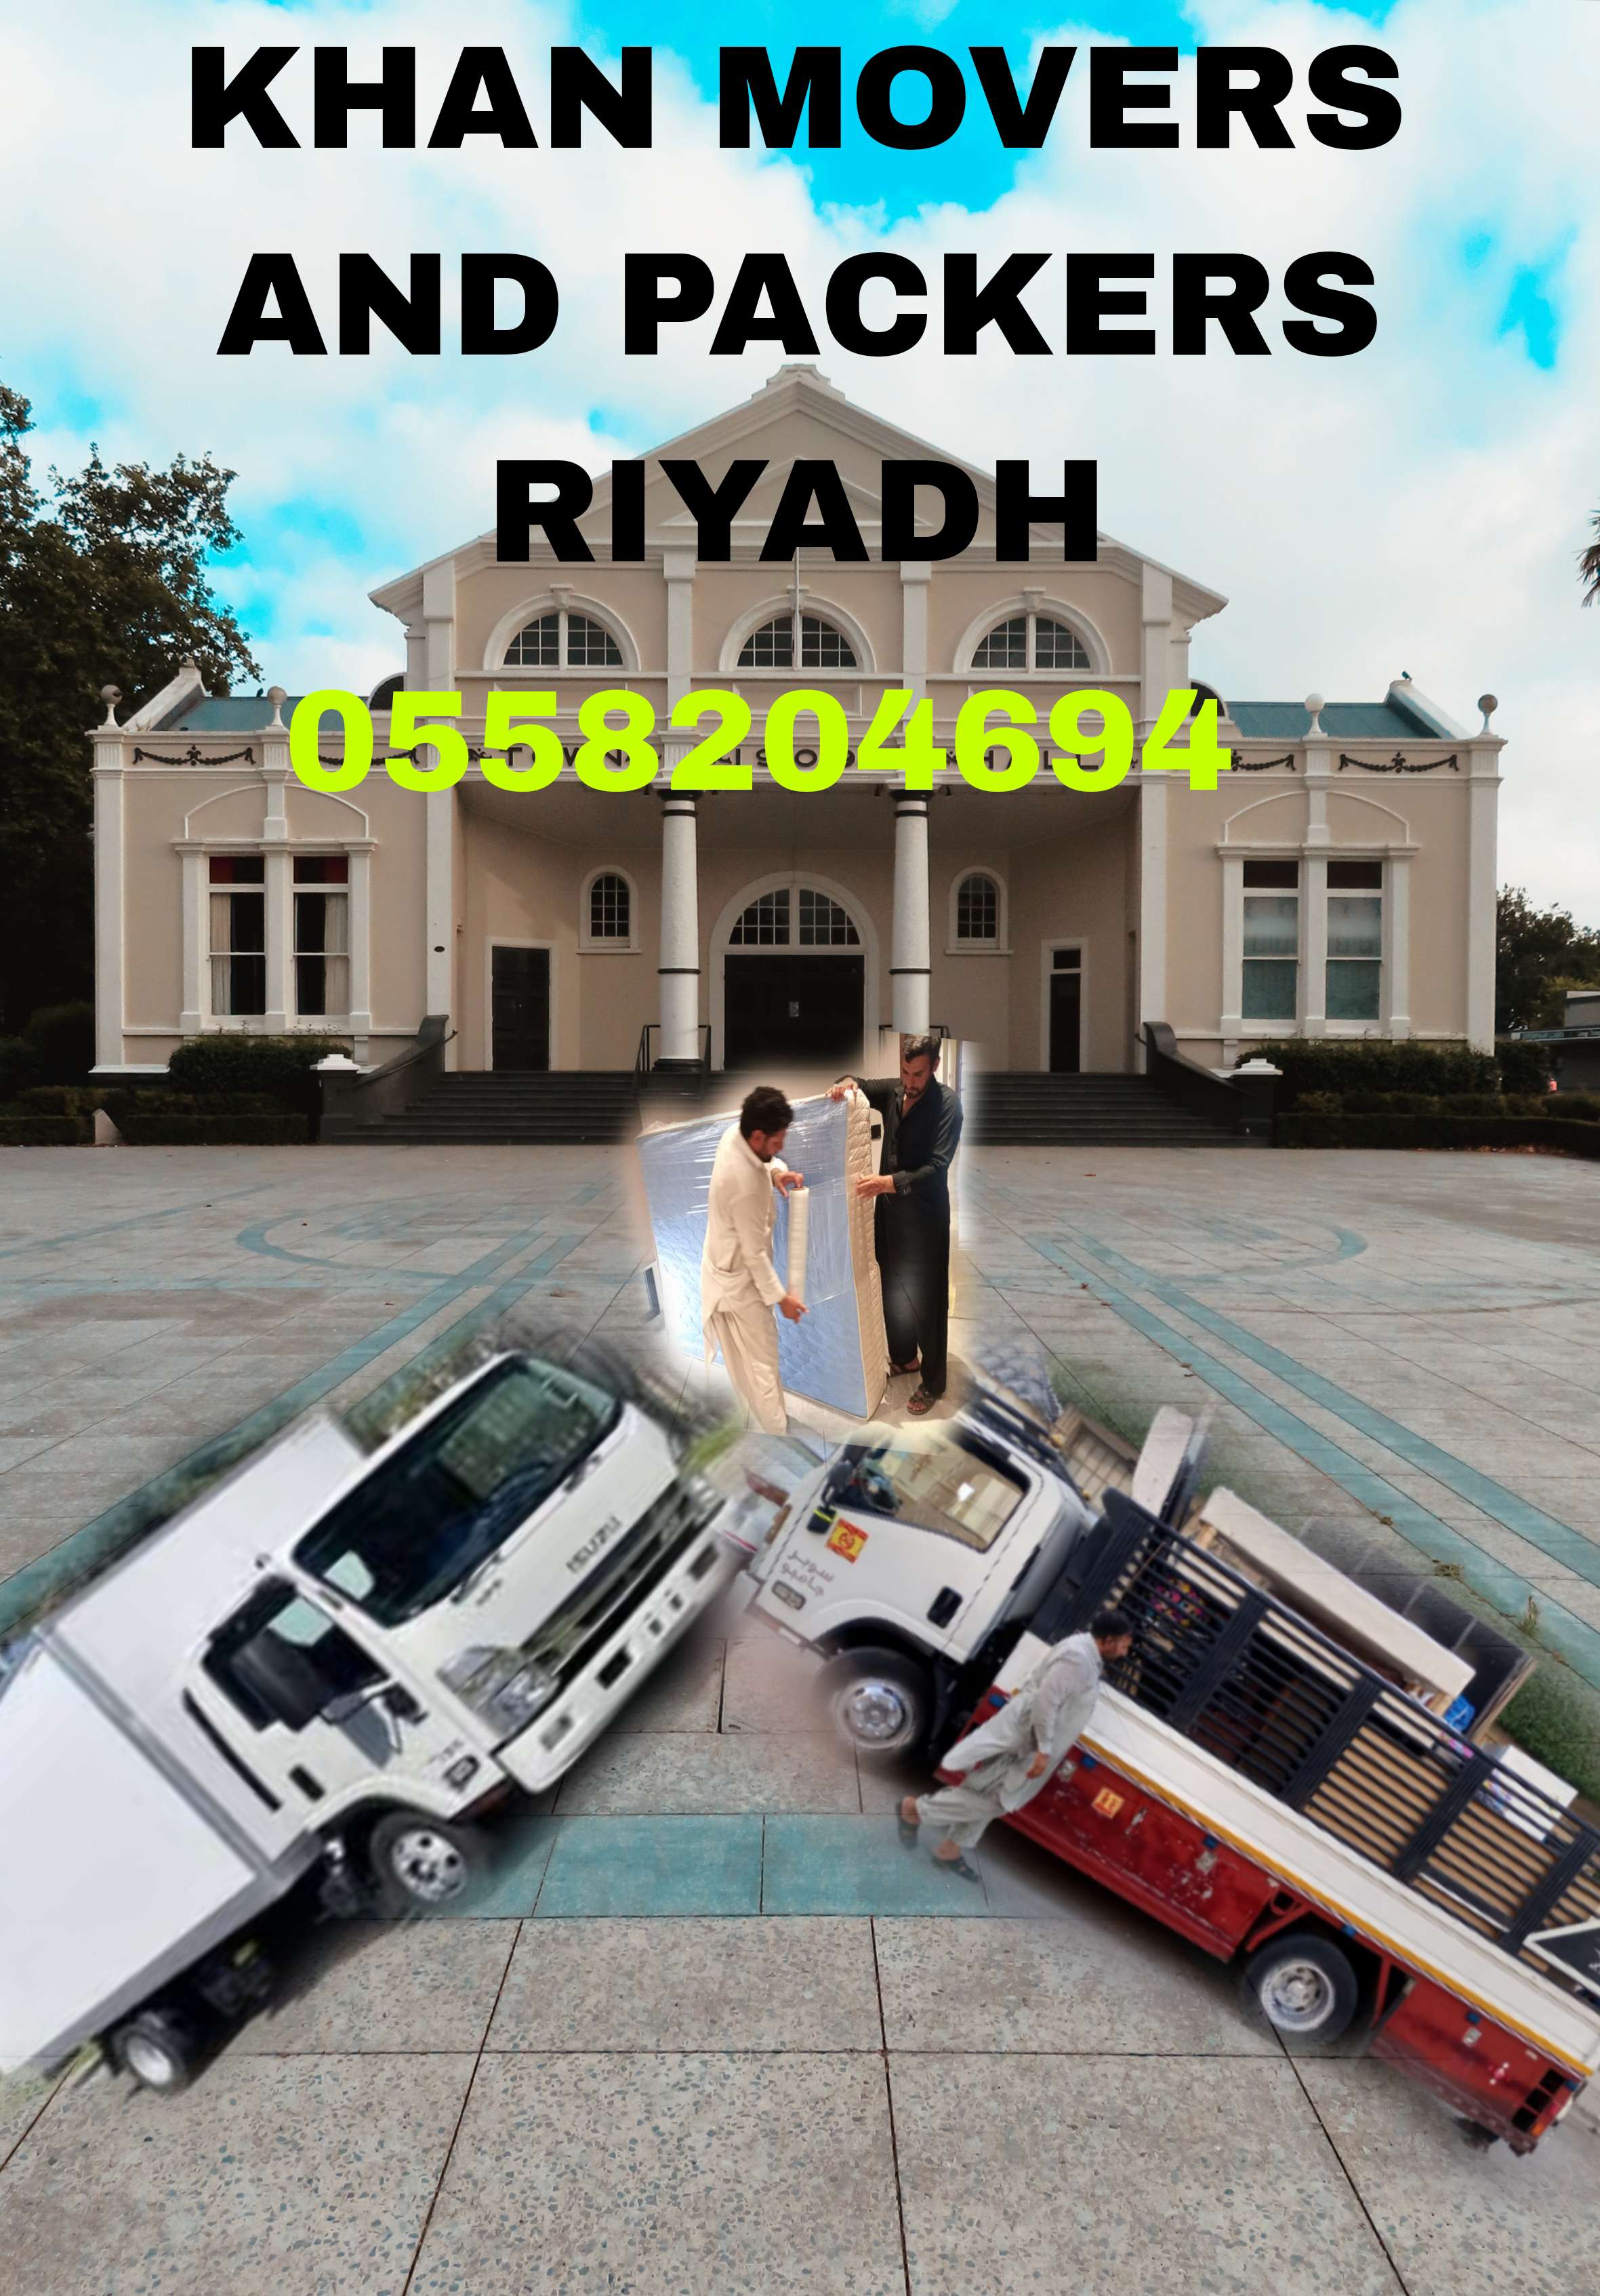 HOME OFFICE SHIFTING COMPANY RIYADH MOVERS AND PACKERS HOUSE OFFICE SHIFTING PACKING